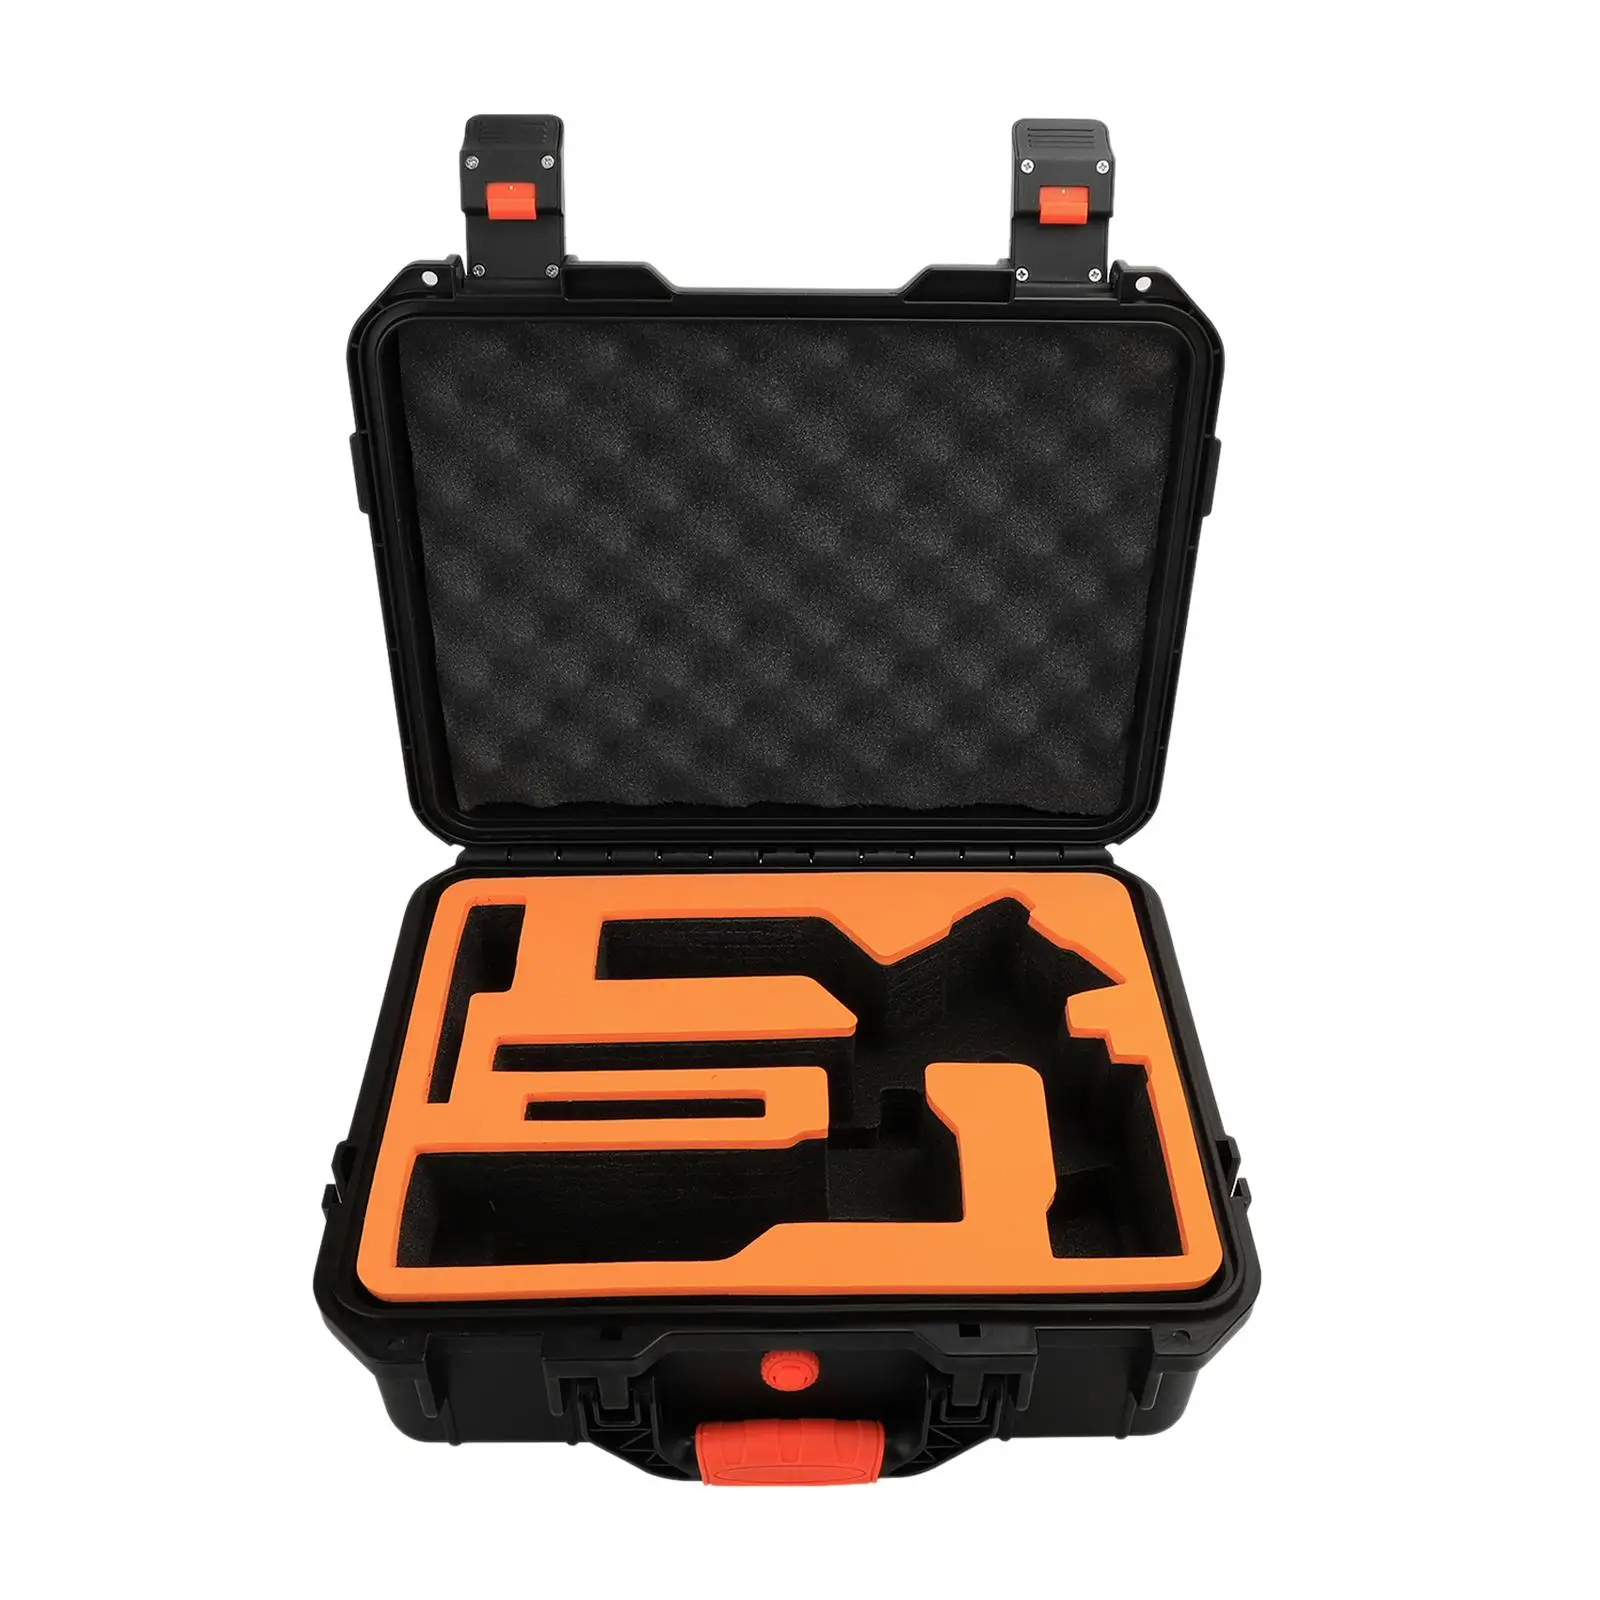 Shockproof Hard Storage Case Waterproof Hard Case Carrying Case for Gimbal Stabilizer Accessories